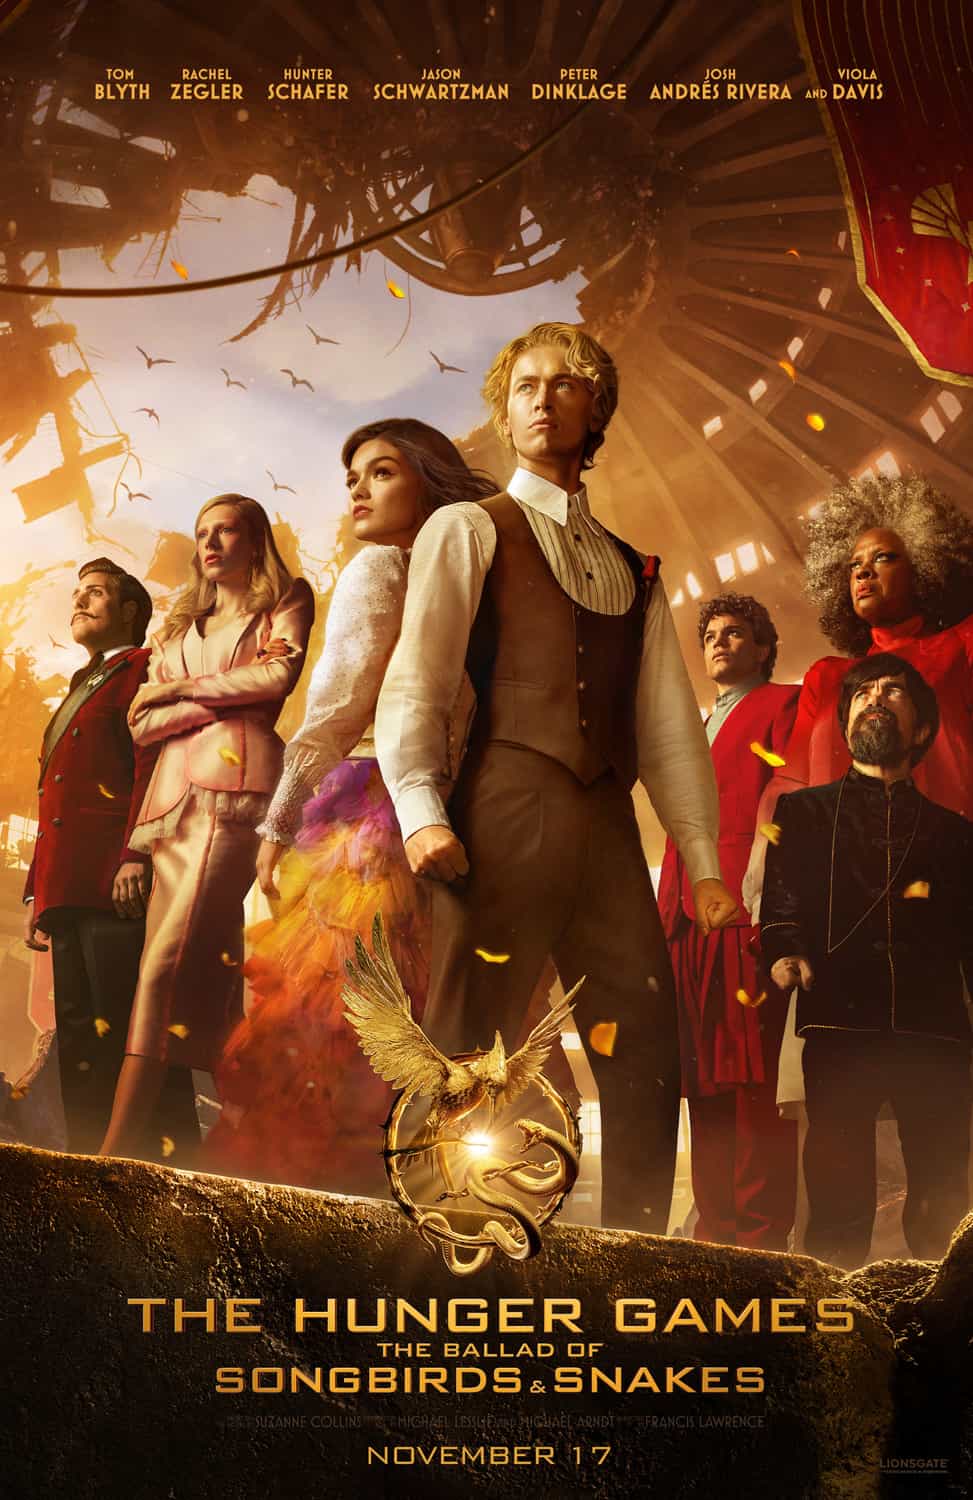 Check out the new trailer and poster for upcoming movie The Hunger Games: The Ballad of Songbirds and Snakes which stars Hunter Schafer and Rachel Zegler - movie UK release date 17th November 2023